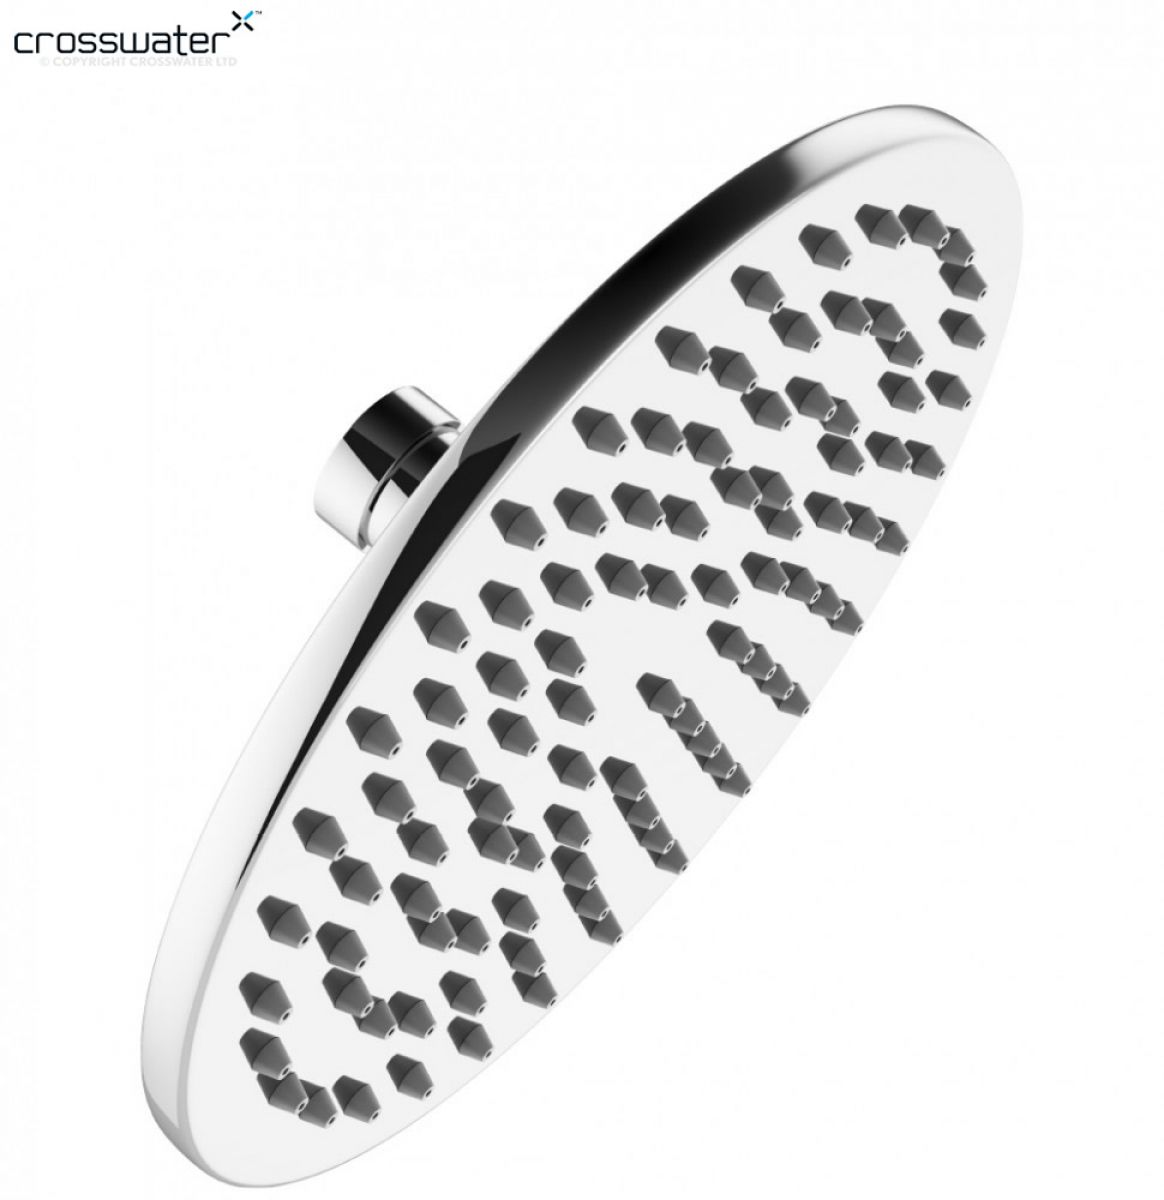 Crosswater Mike Pro Fixed Shower Head